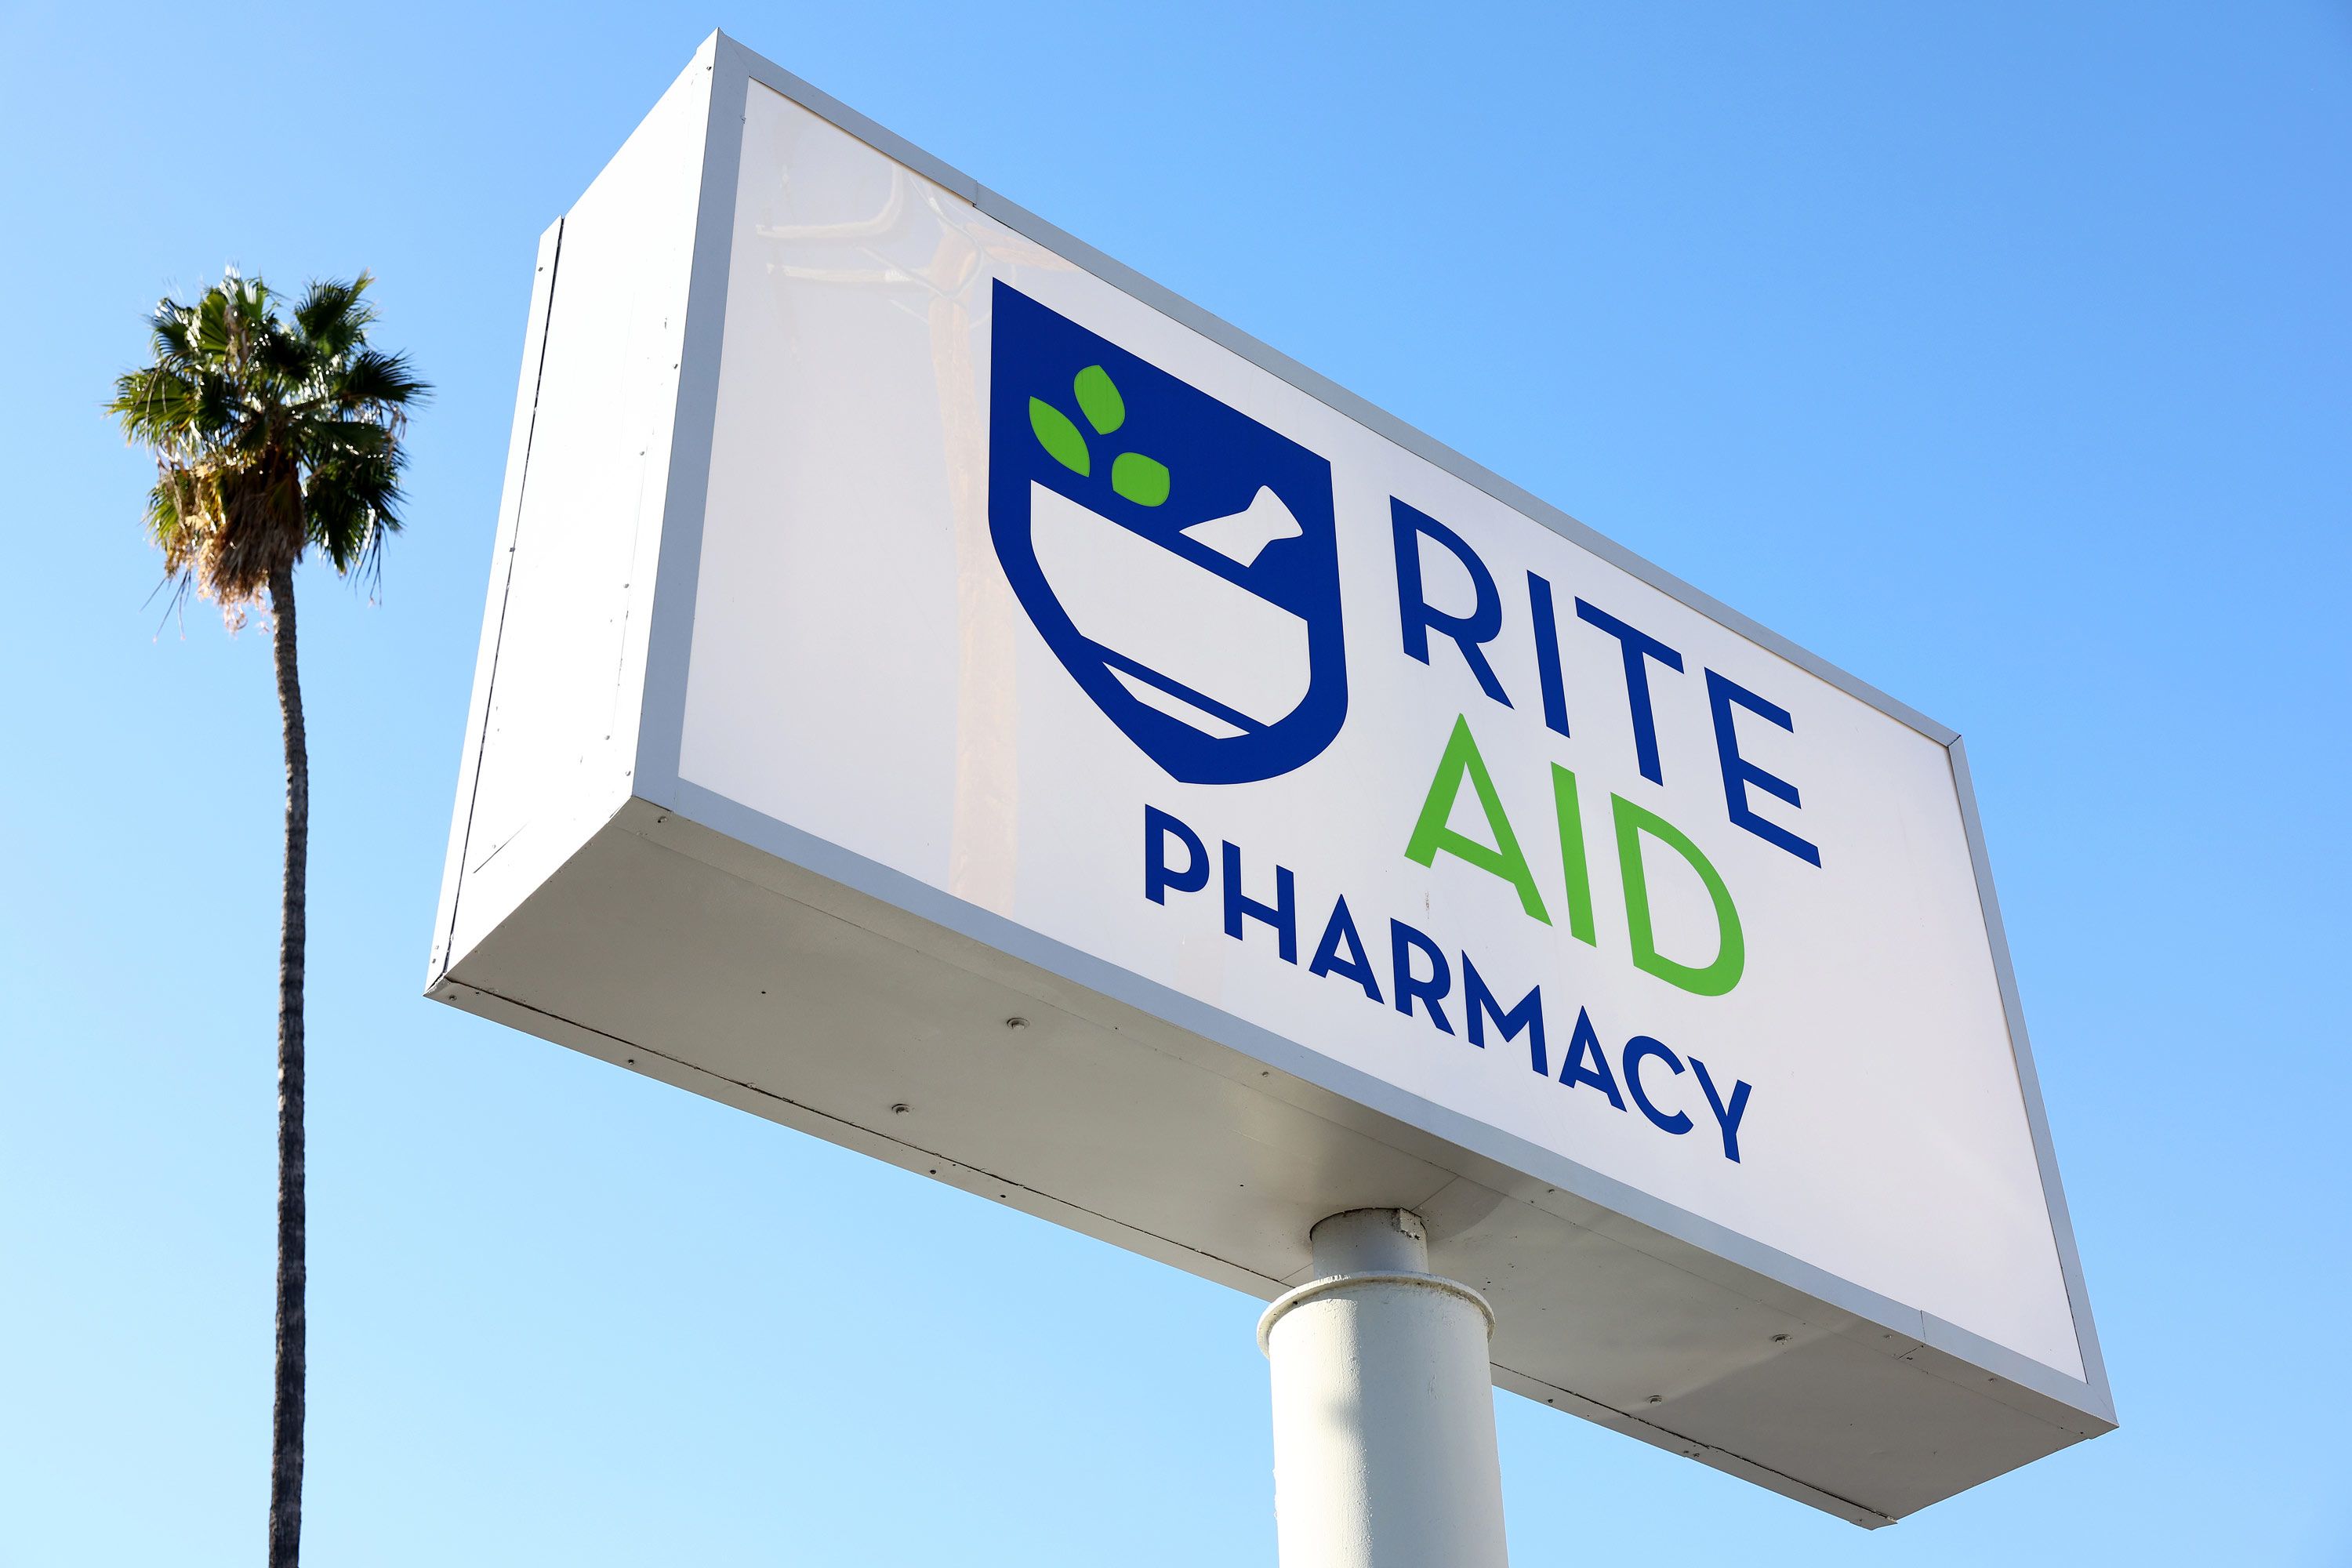 Rite Aid, Philadelphia-based pharmacy chain, plans to close hundreds of  stores as part of bankruptcy plan - 6abc Philadelphia